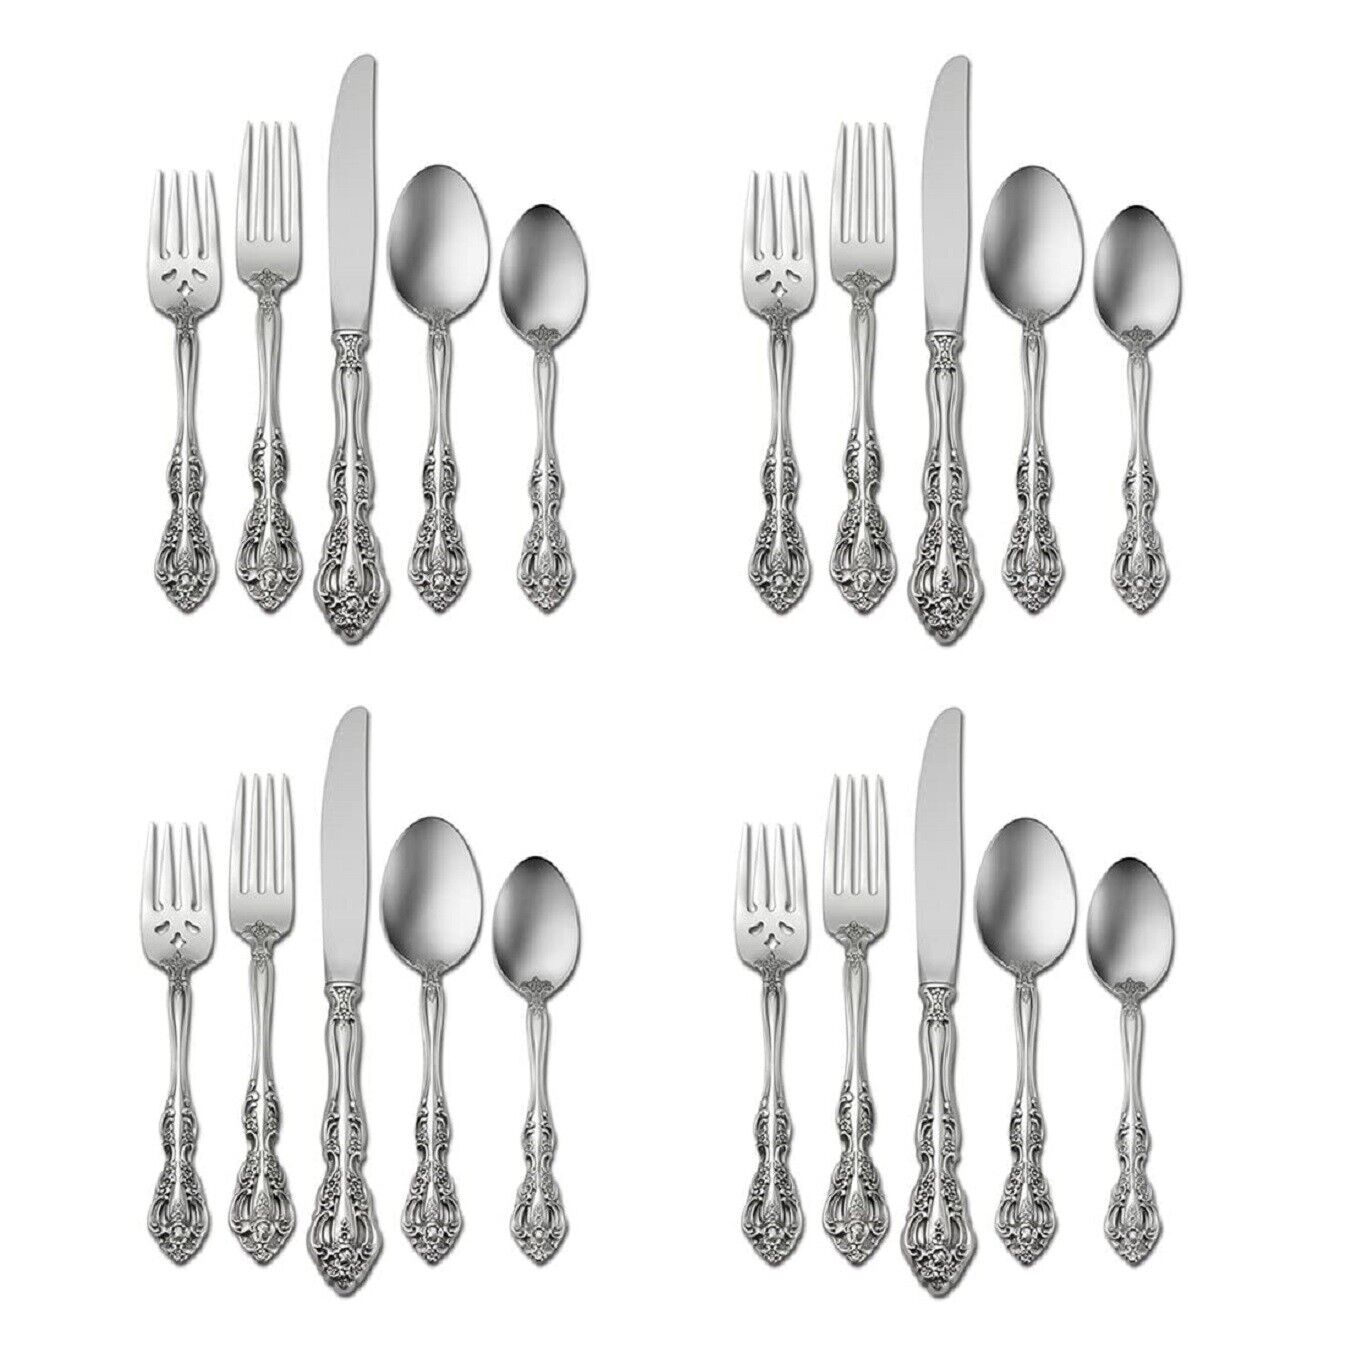 Oneida Michelangelo 18/10 Stainless Steel 20pc. Flatware Set (Service for Four)